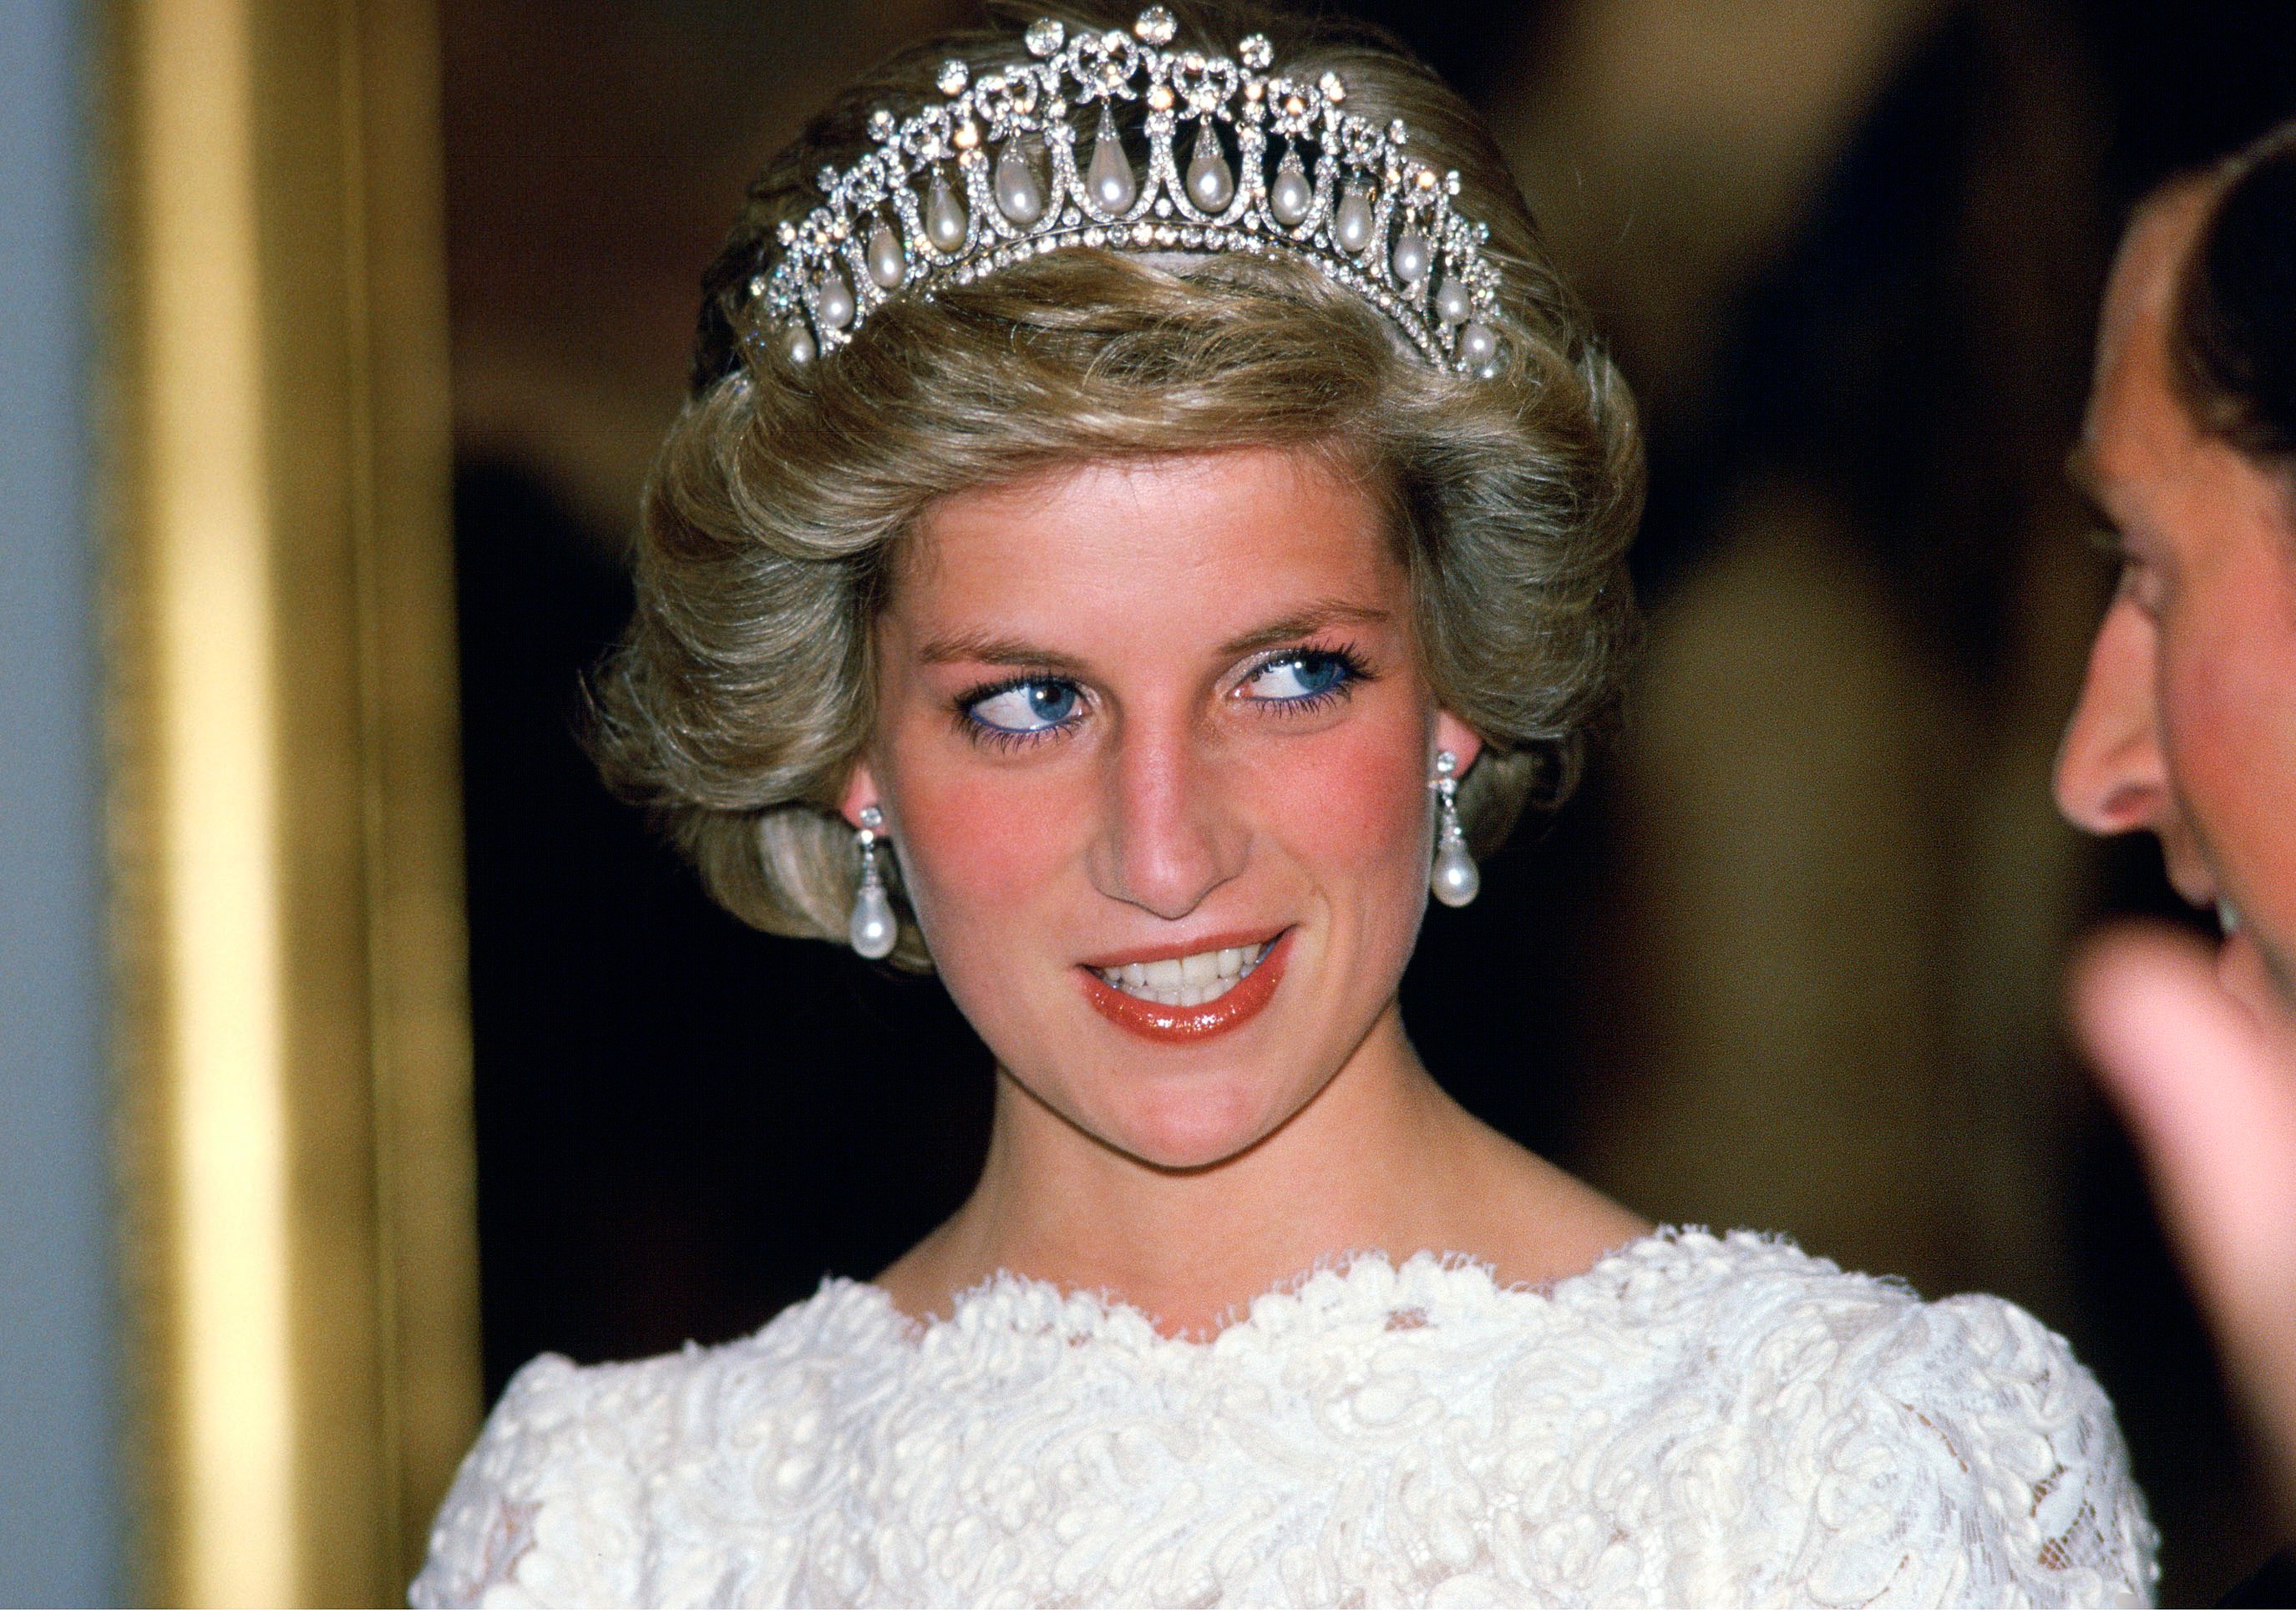 Princess Diana donning Queen Mary's Diamond And Pearl Tiara while having a conversation with Prince Charles